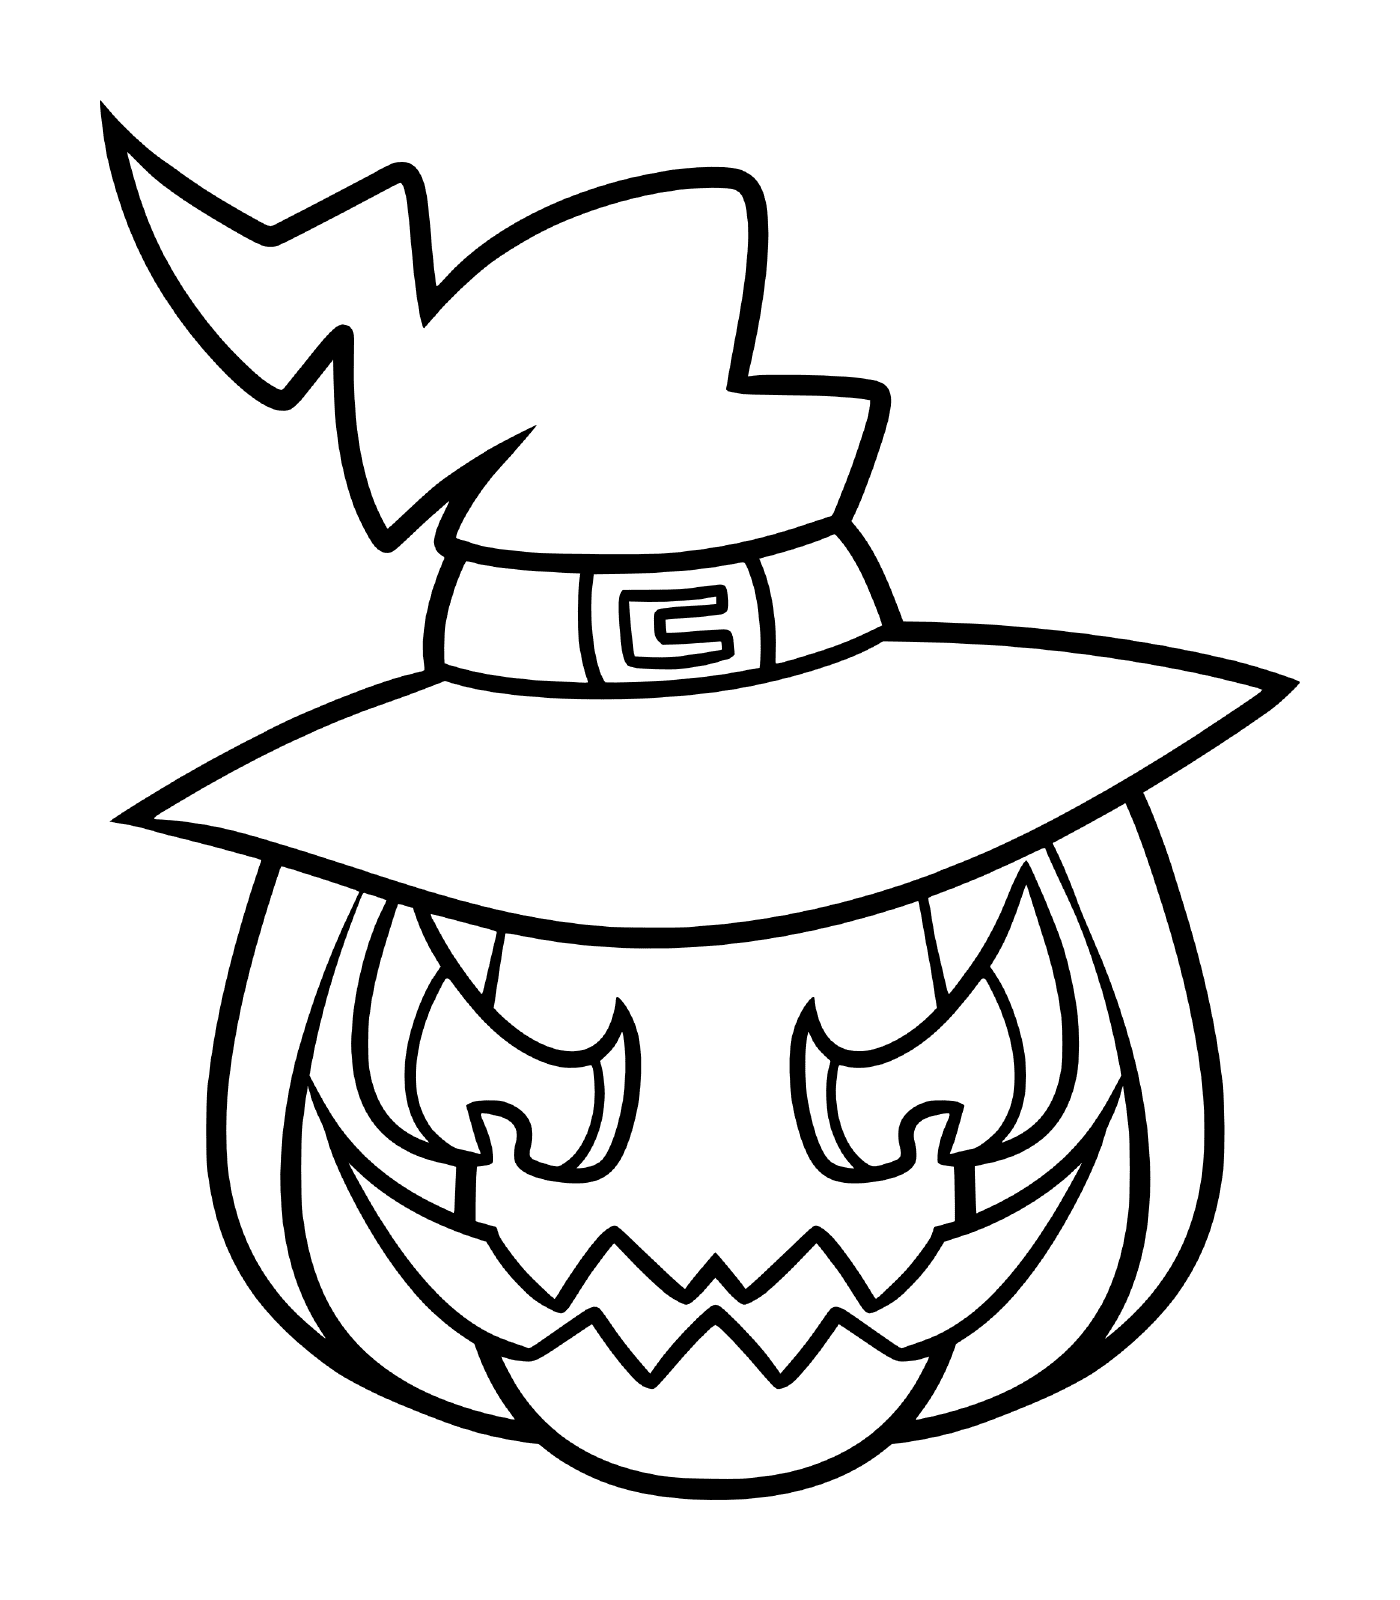  Scary pumpkin with a witch hat 